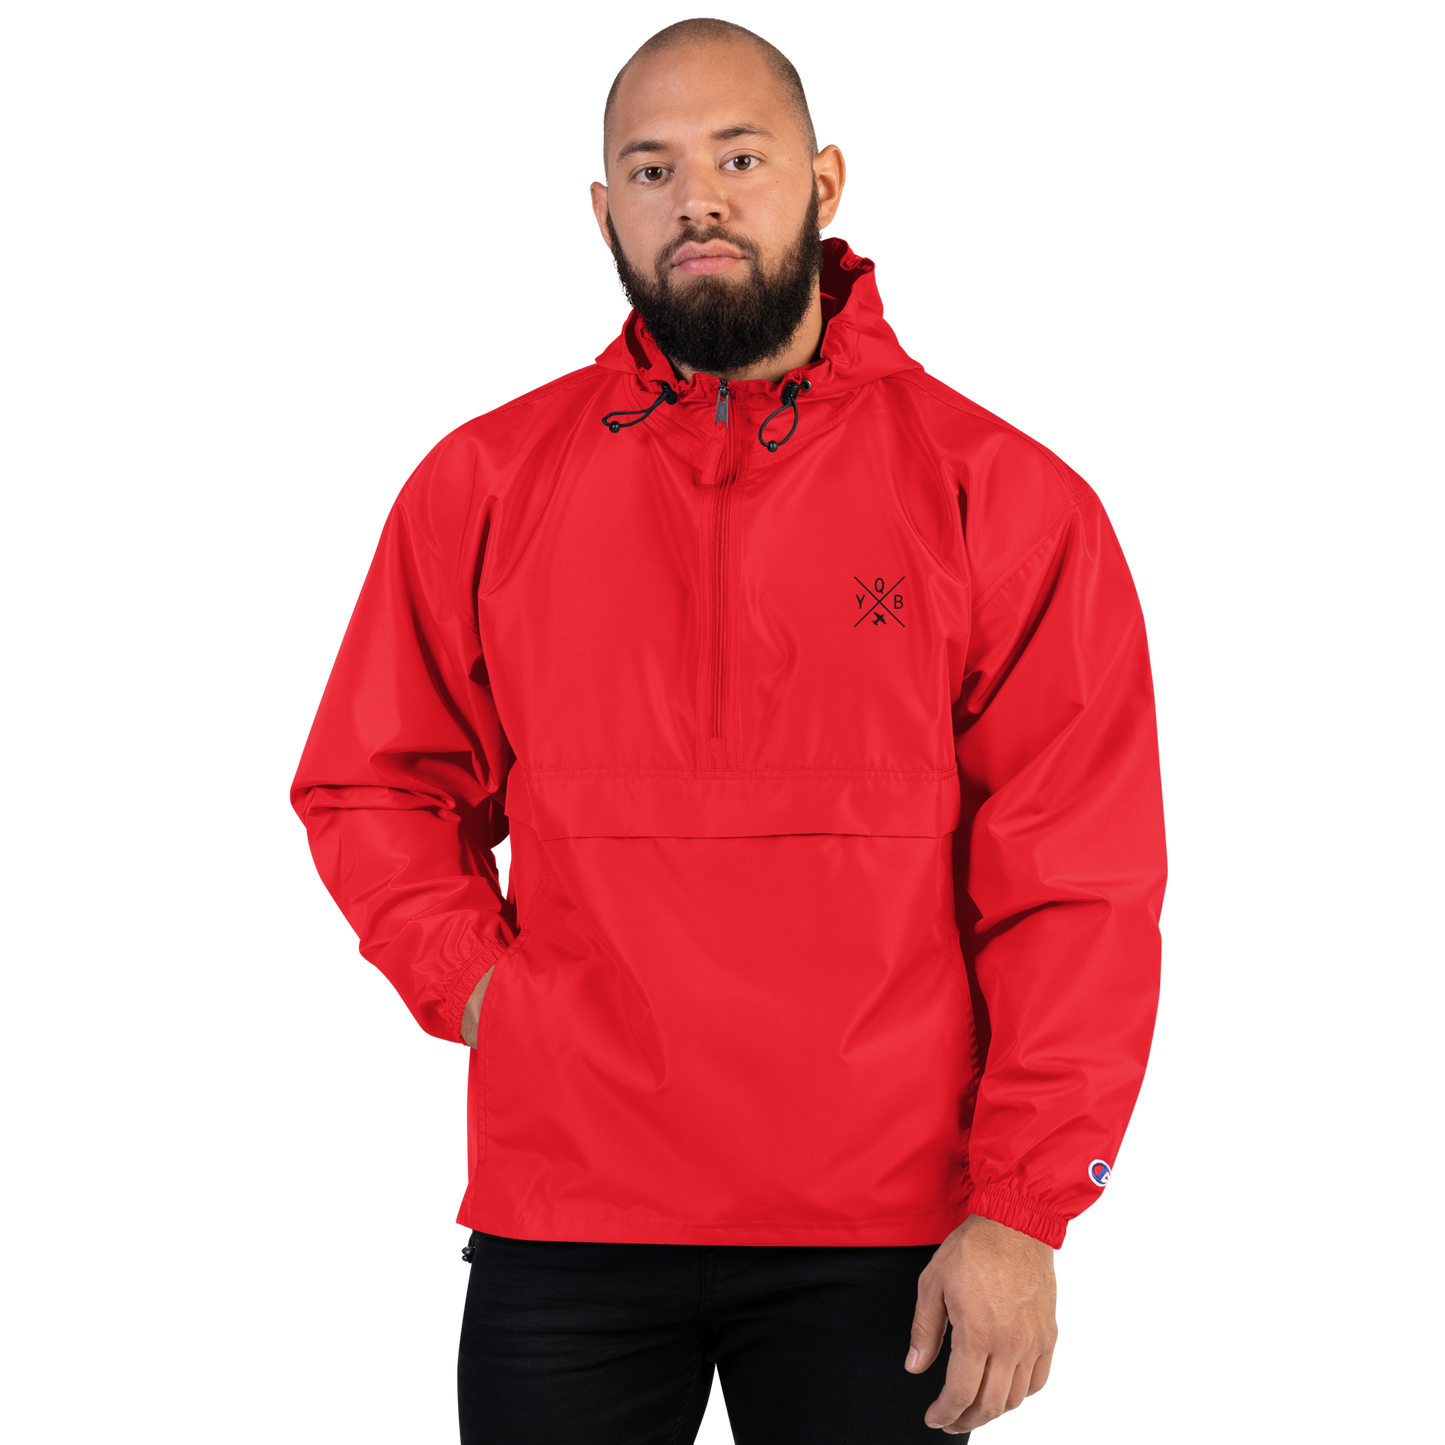 Crossed-X Packable Jacket • YQB Quebec City • YHM Designs - Image 11